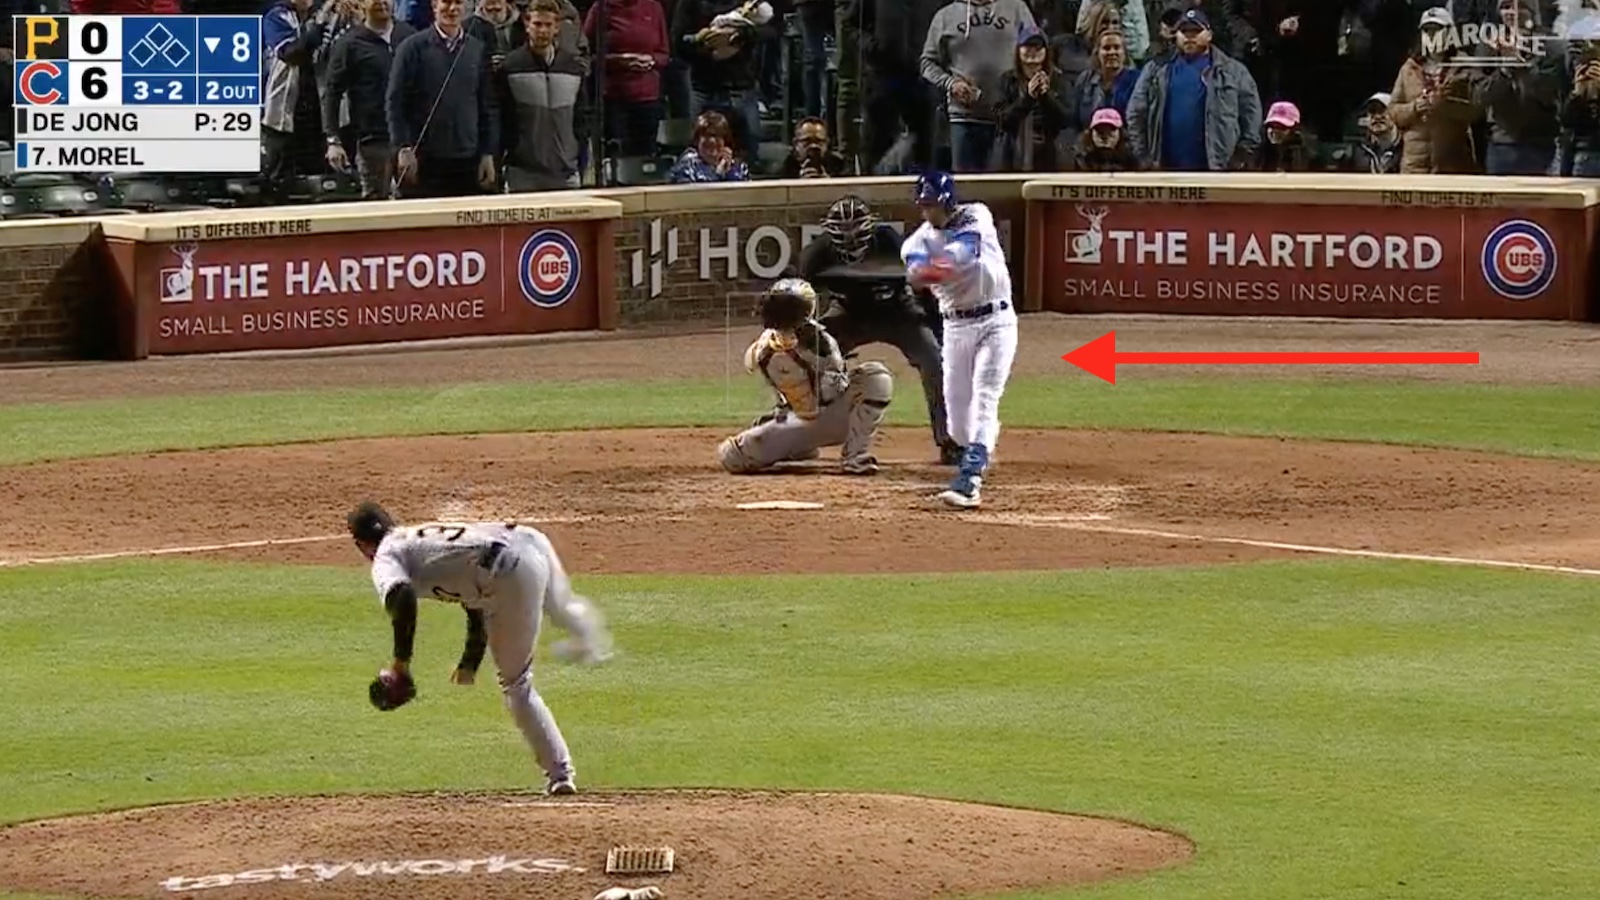 Video Cubs rookie hits home run in first MLB atbat